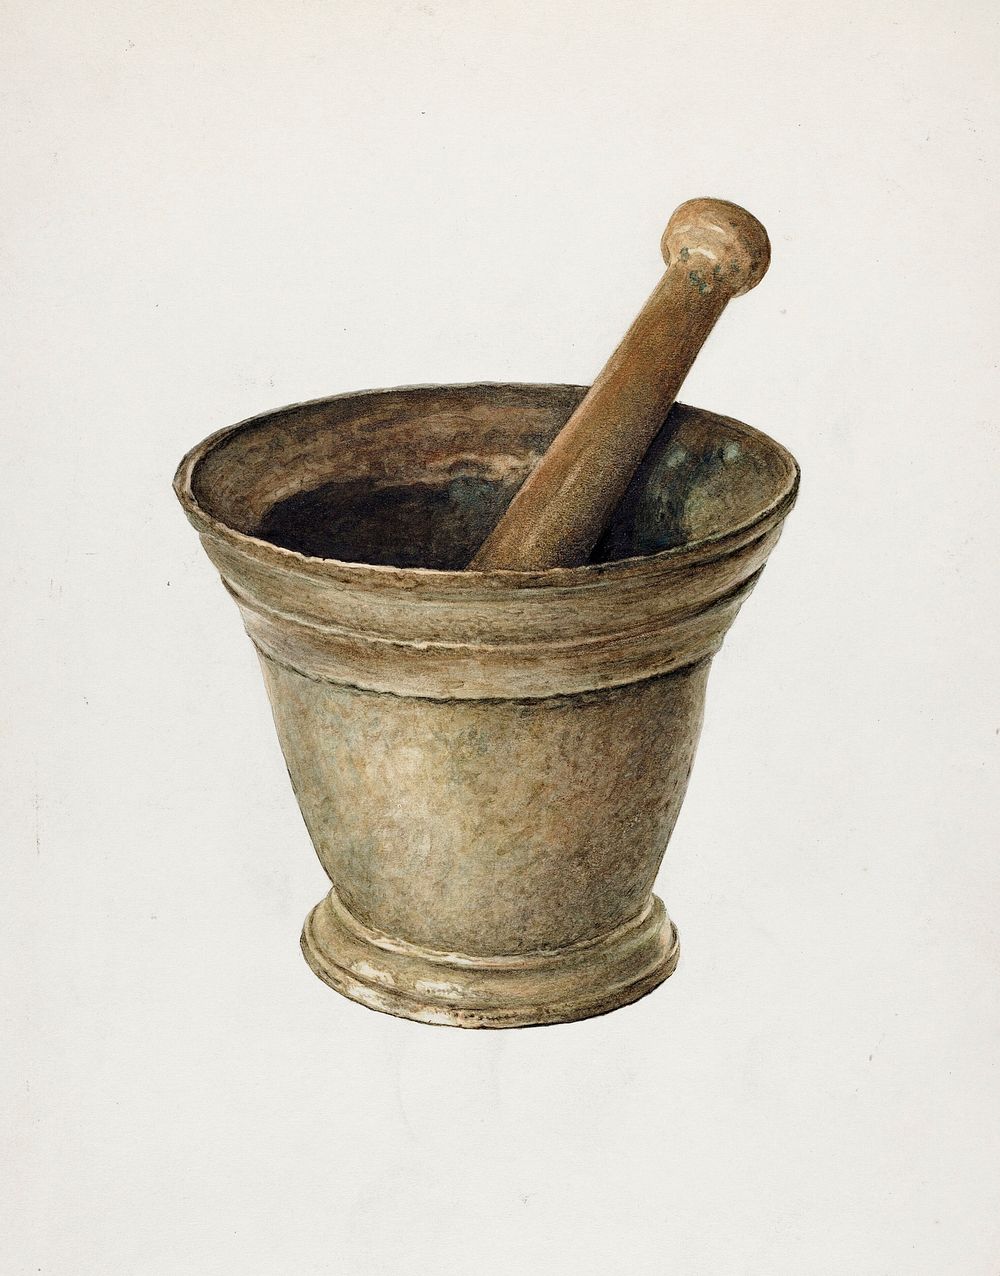 Brass Mortar and Pestle (ca. 1939) by Carl Buergerniss. Original from The National Gallery of Art. Digitally enhanced by…